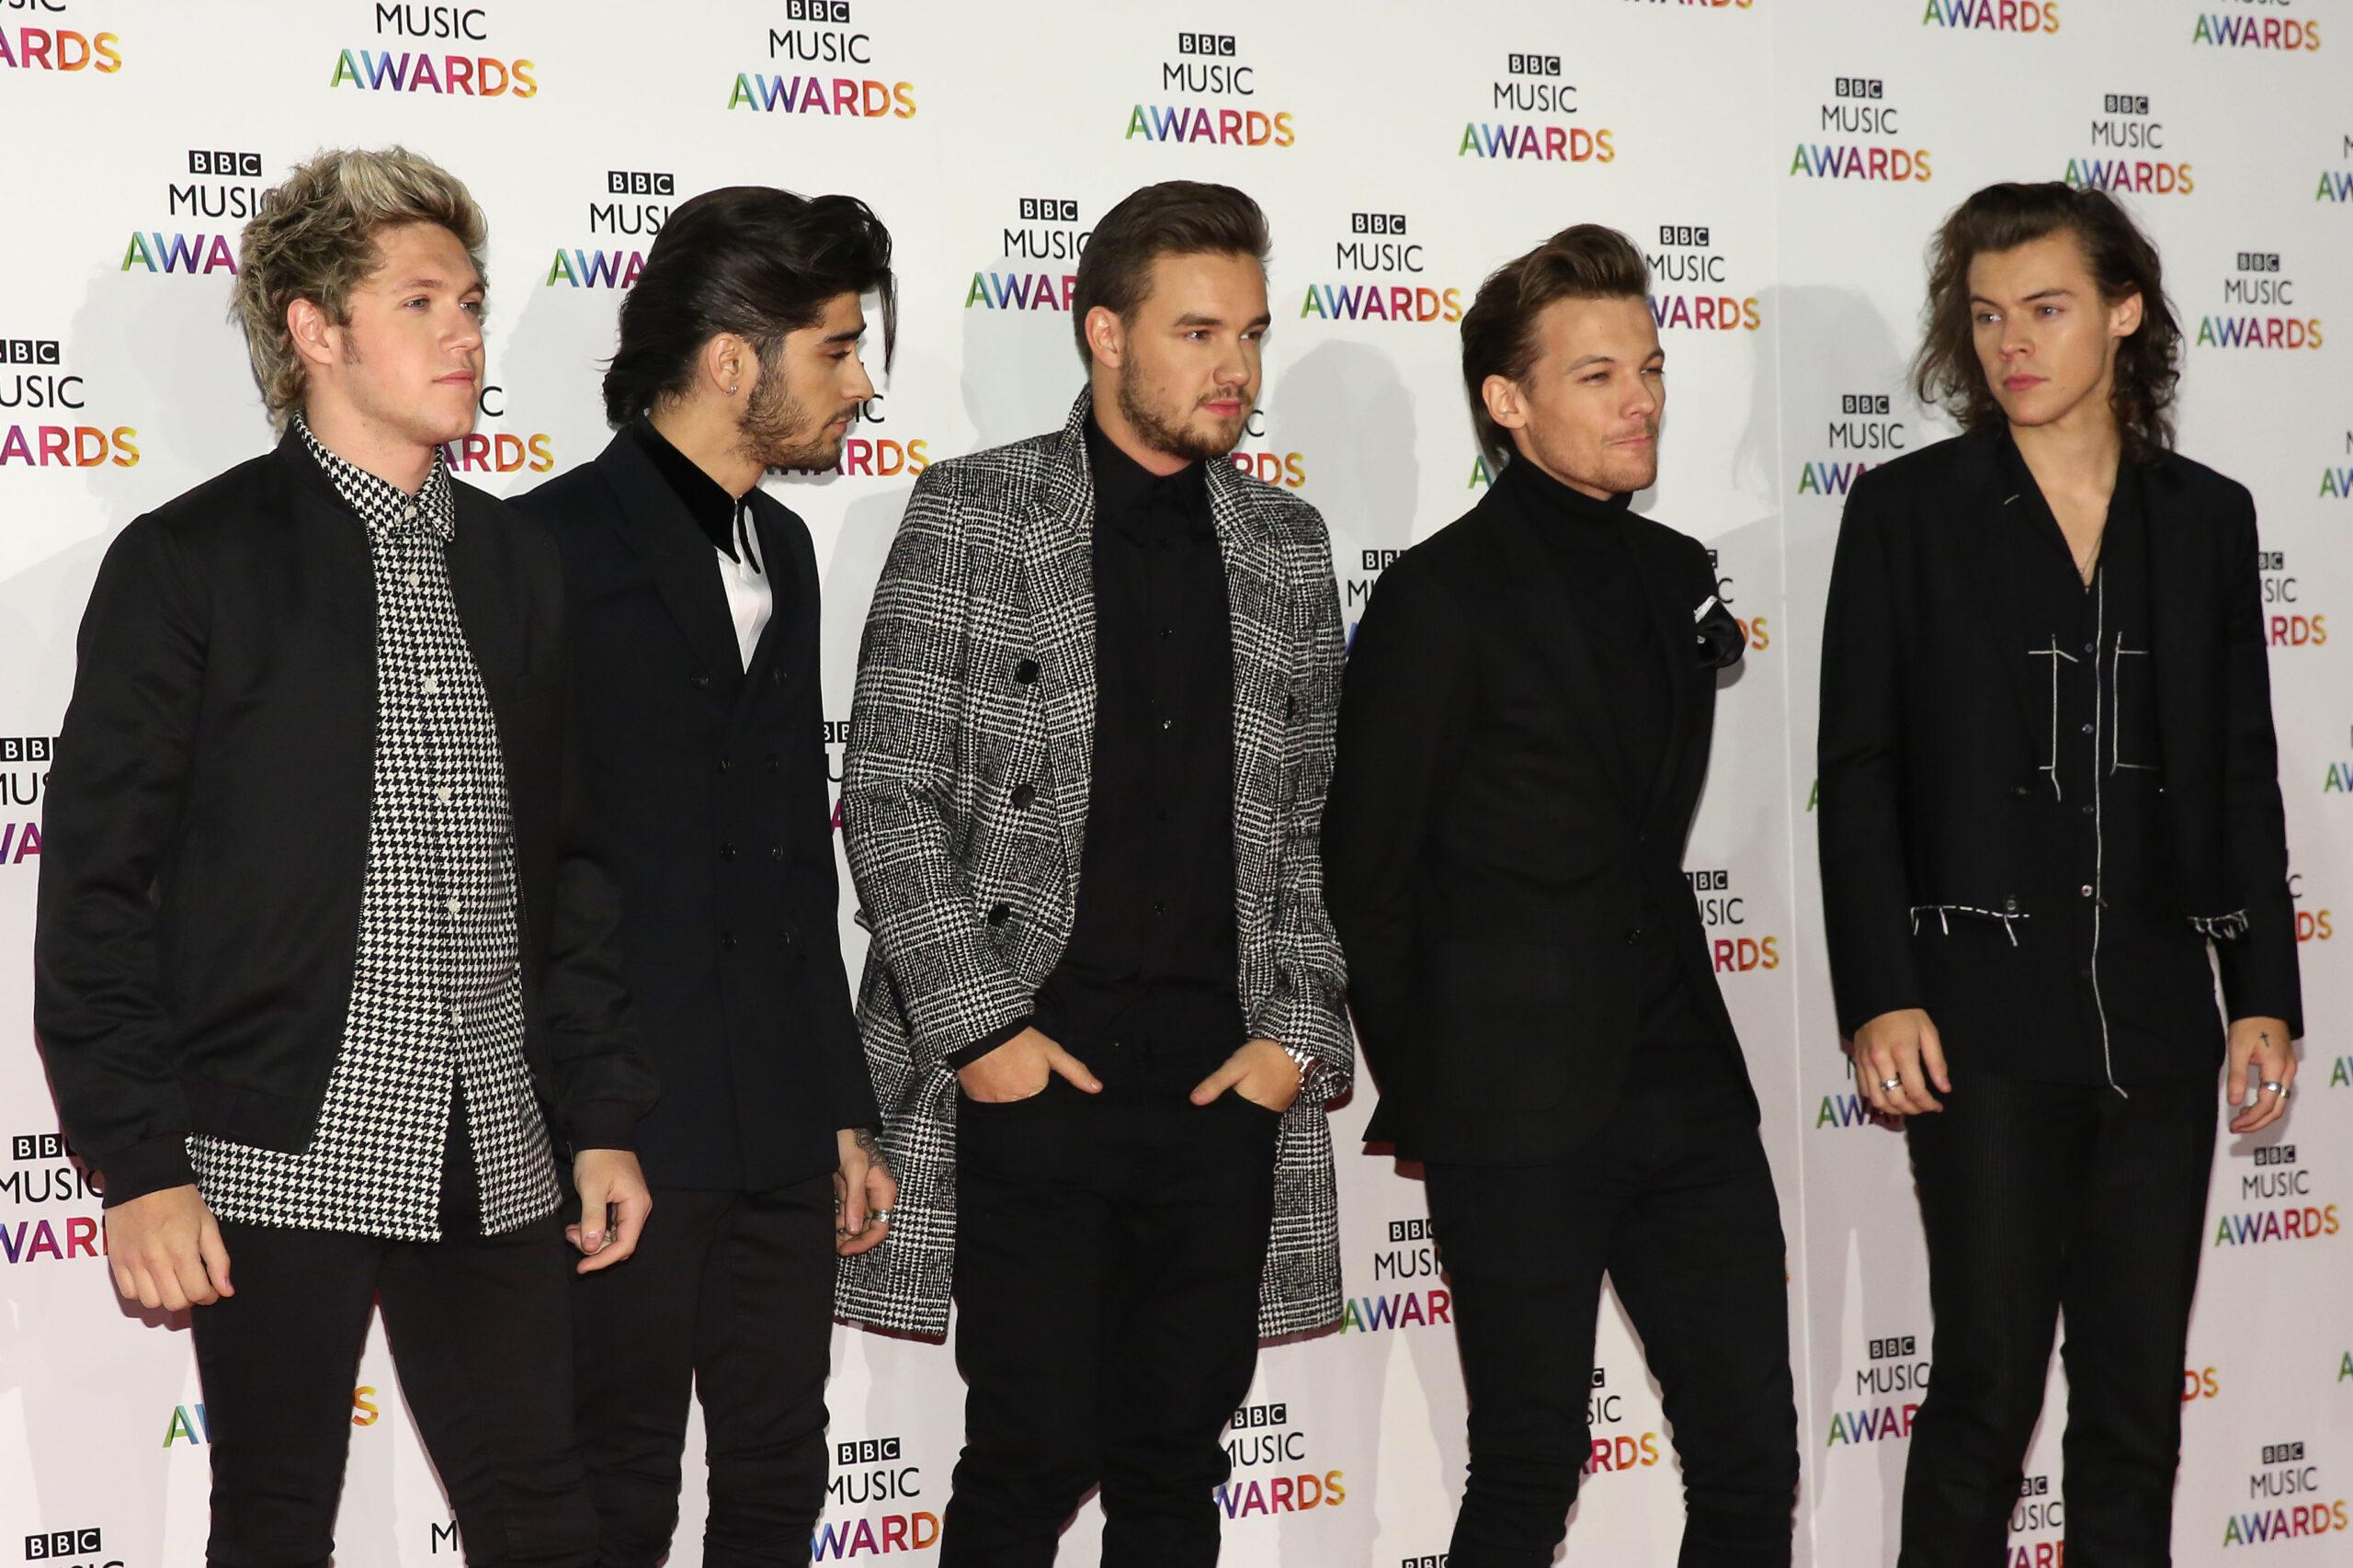 One Direction at The BBC Music Awards 2014